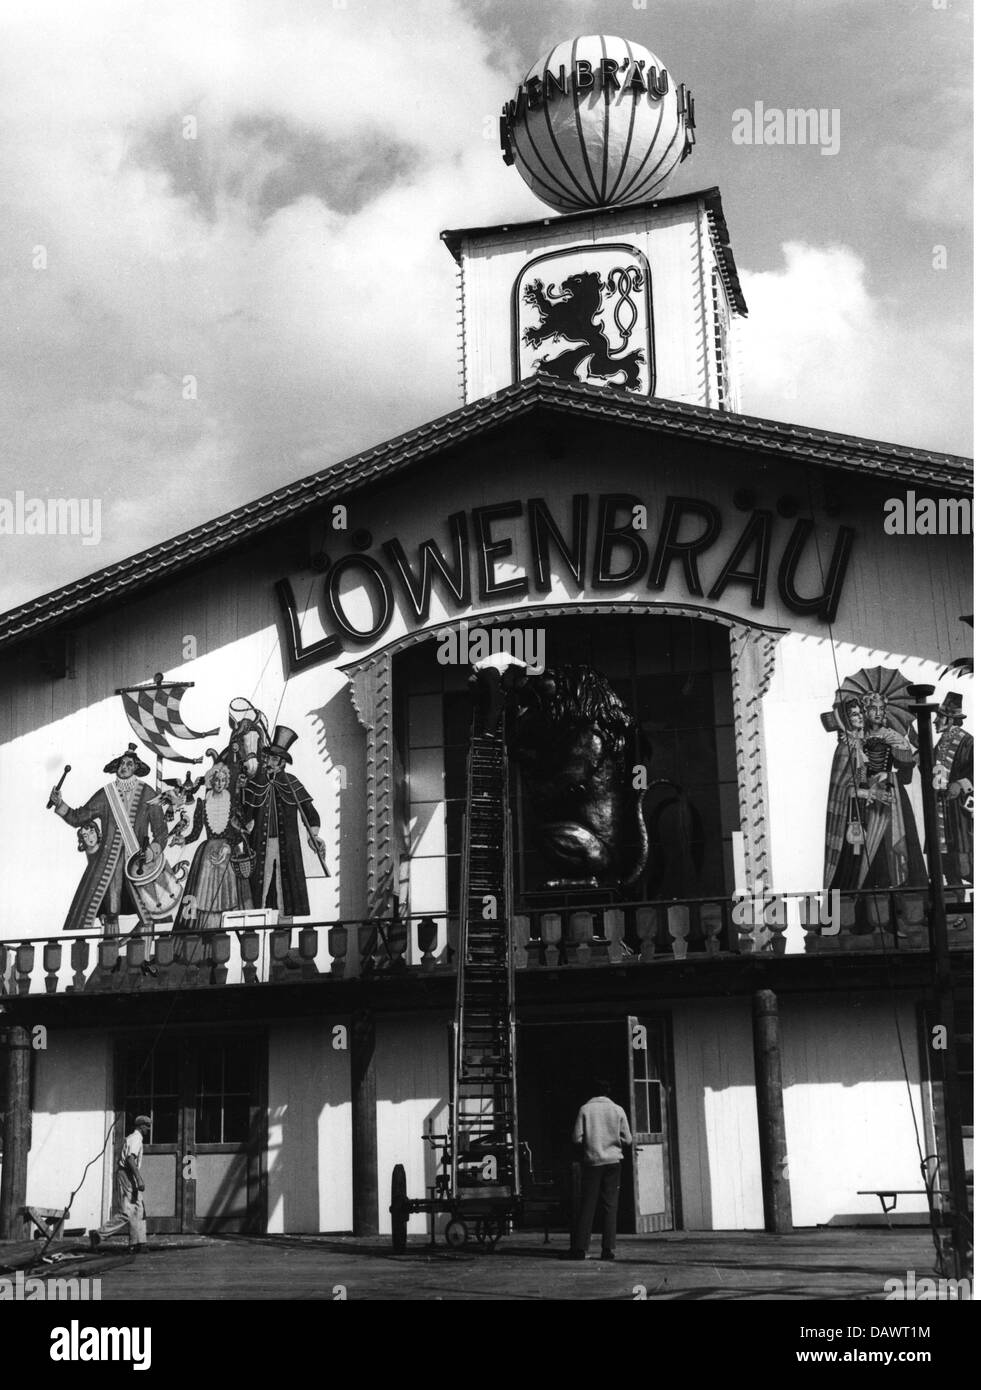 geography / travel, Germany, Munich, Oktoberfest, Lowenbrau-Festzelt, exterior view, constuction, 1950s, Additional-Rights-Clearences-Not Available Stock Photo